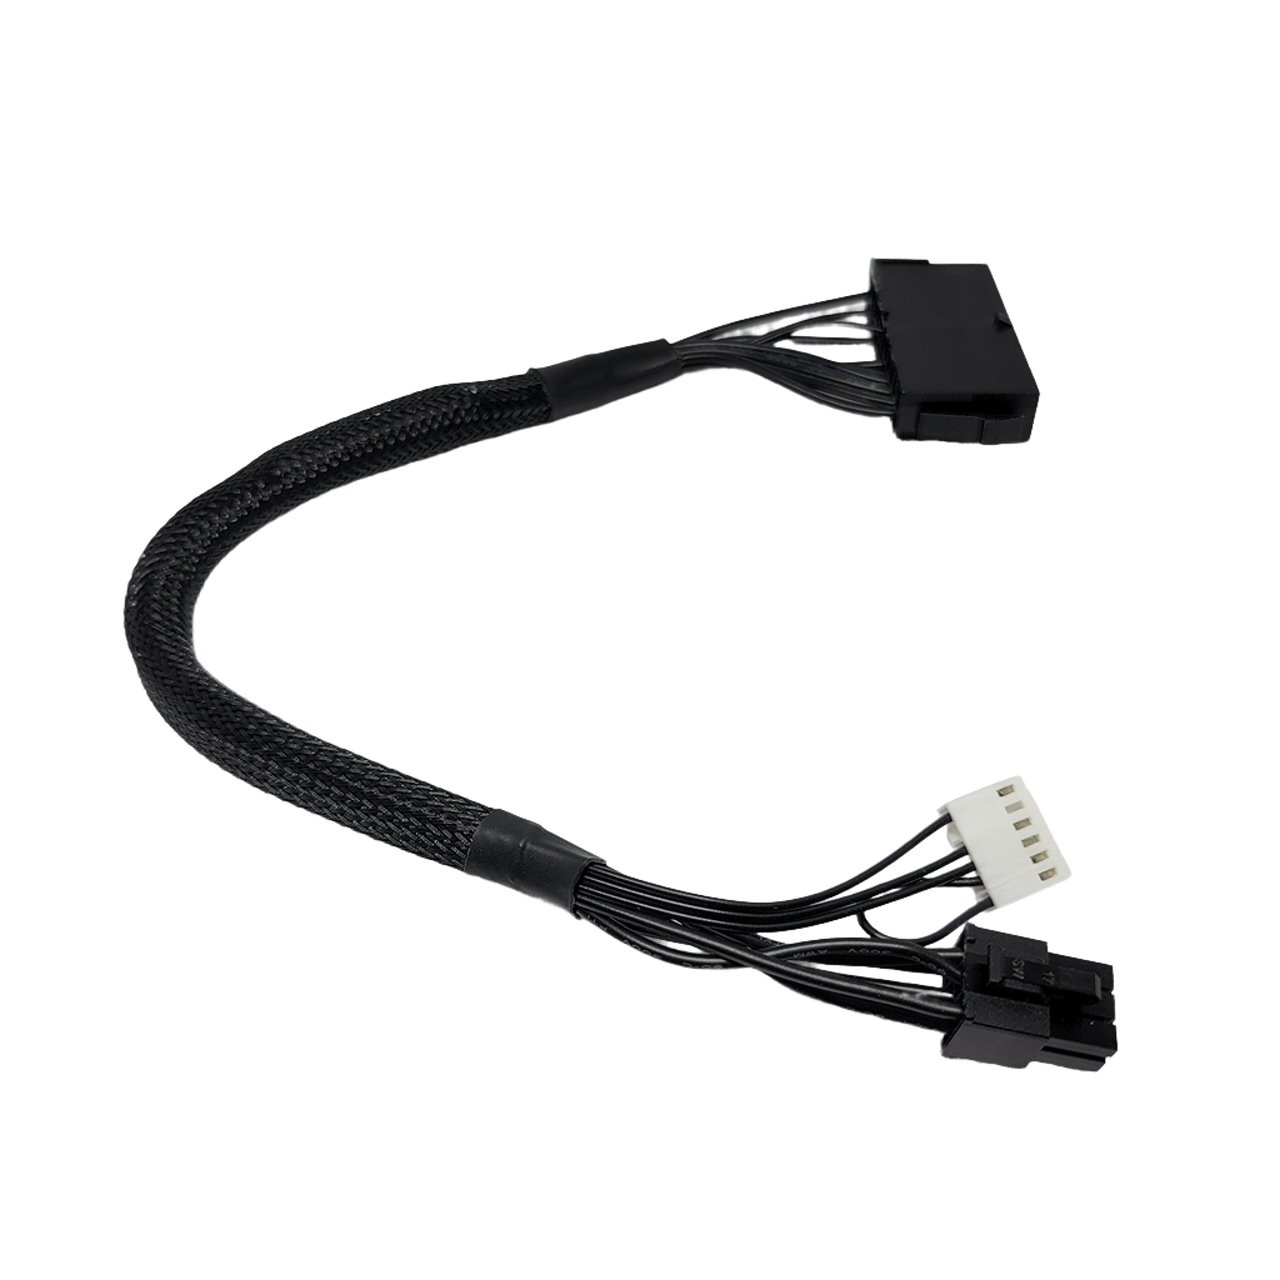 HP Z240 PSU Main Power 24-Pin to 6-Pin Adapter Cable (30cm)